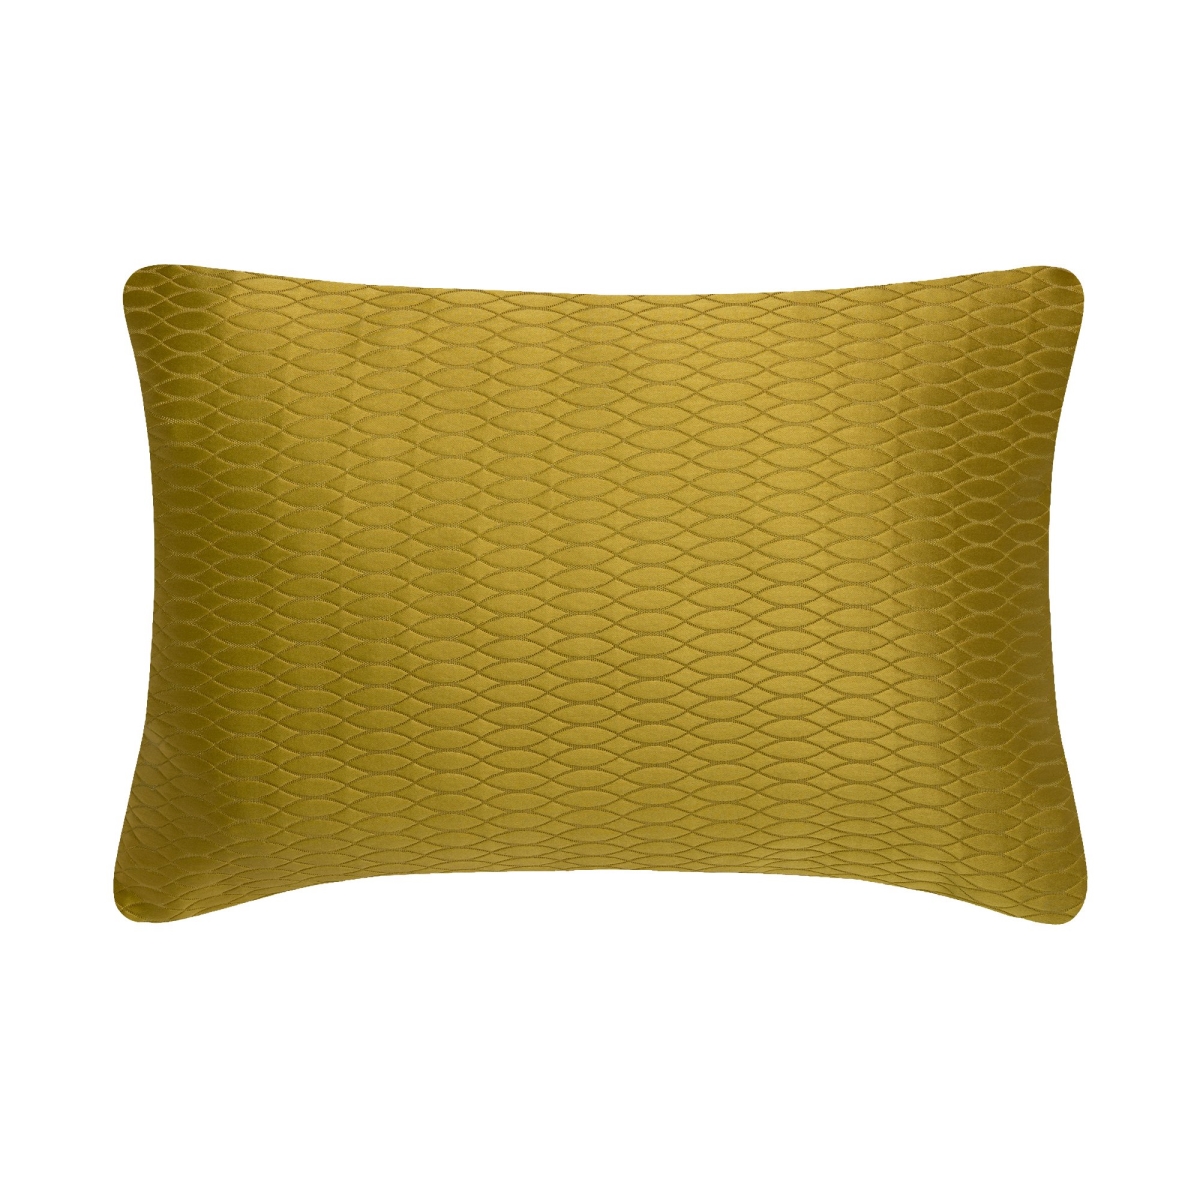 14 X 18 In. Biscay Boudoir Cushion Cover - Gold